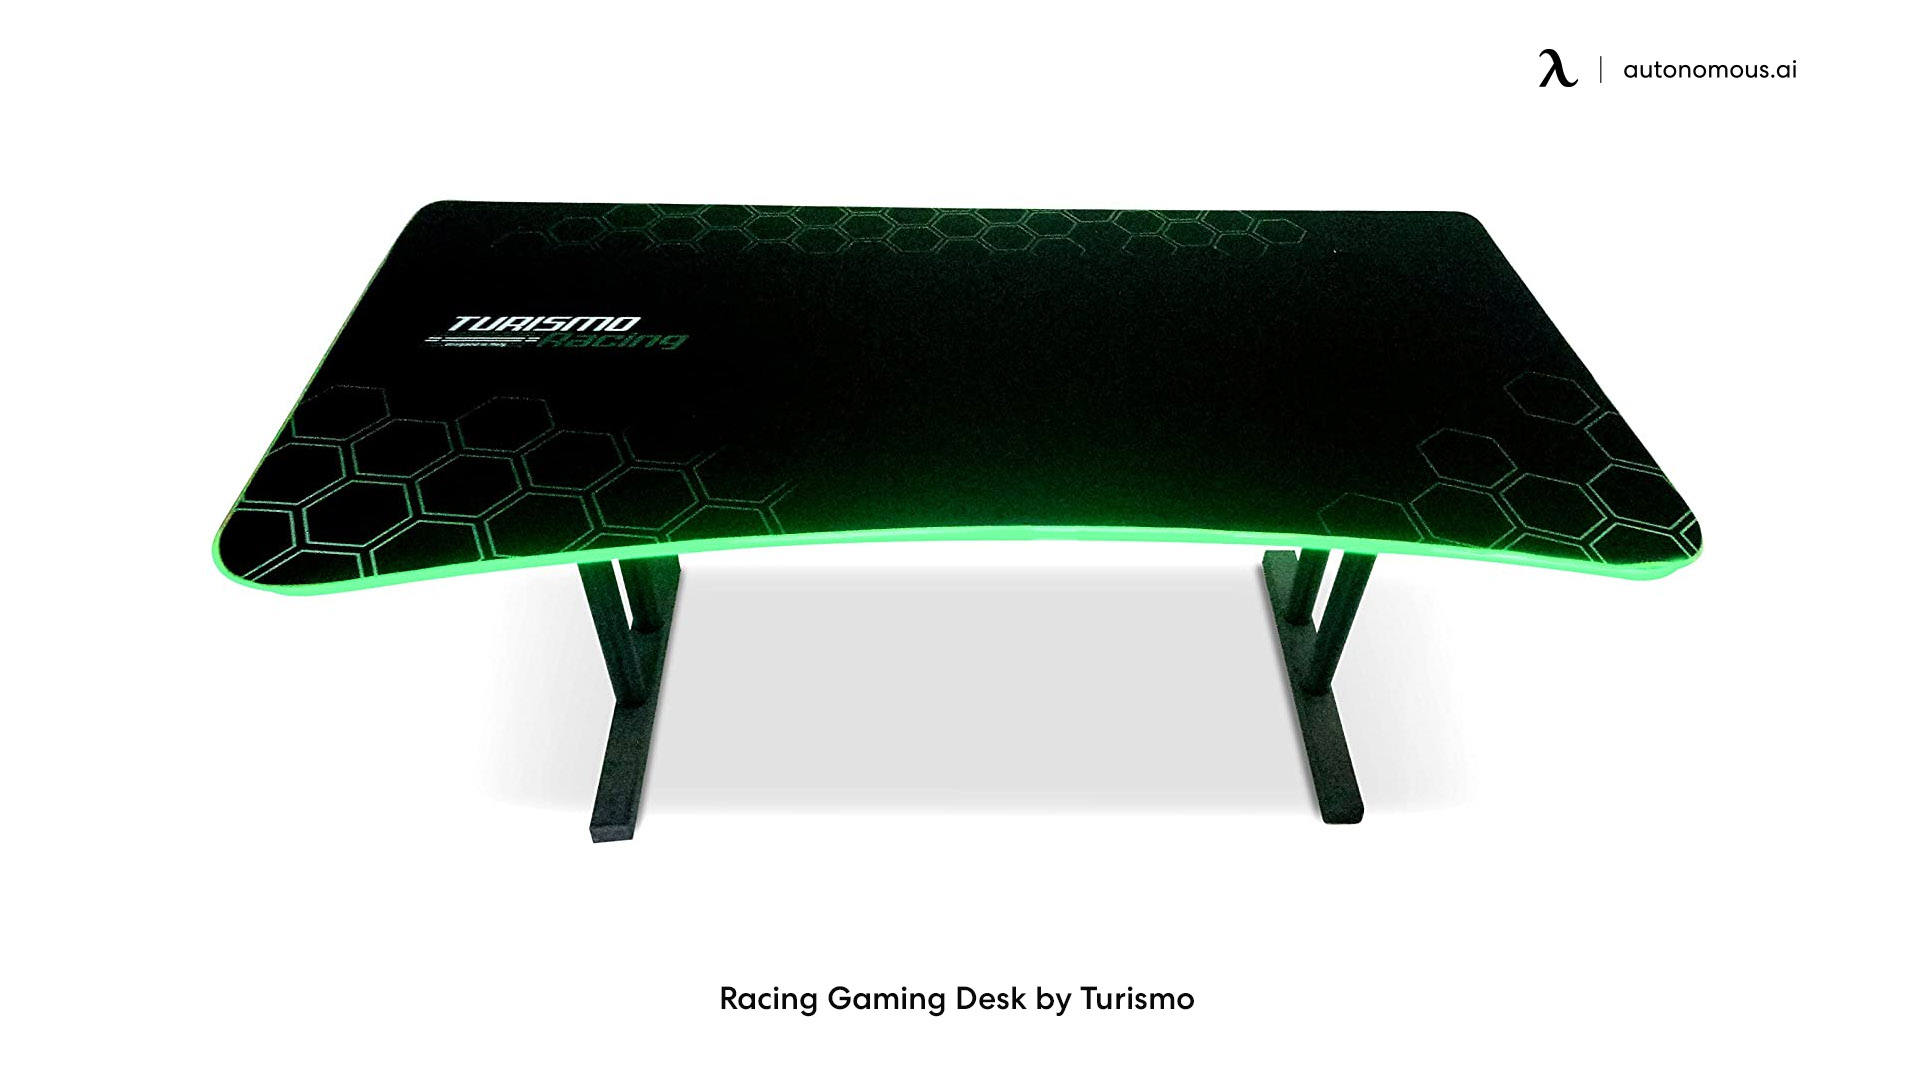 Racing Gaming Desk by Turismo